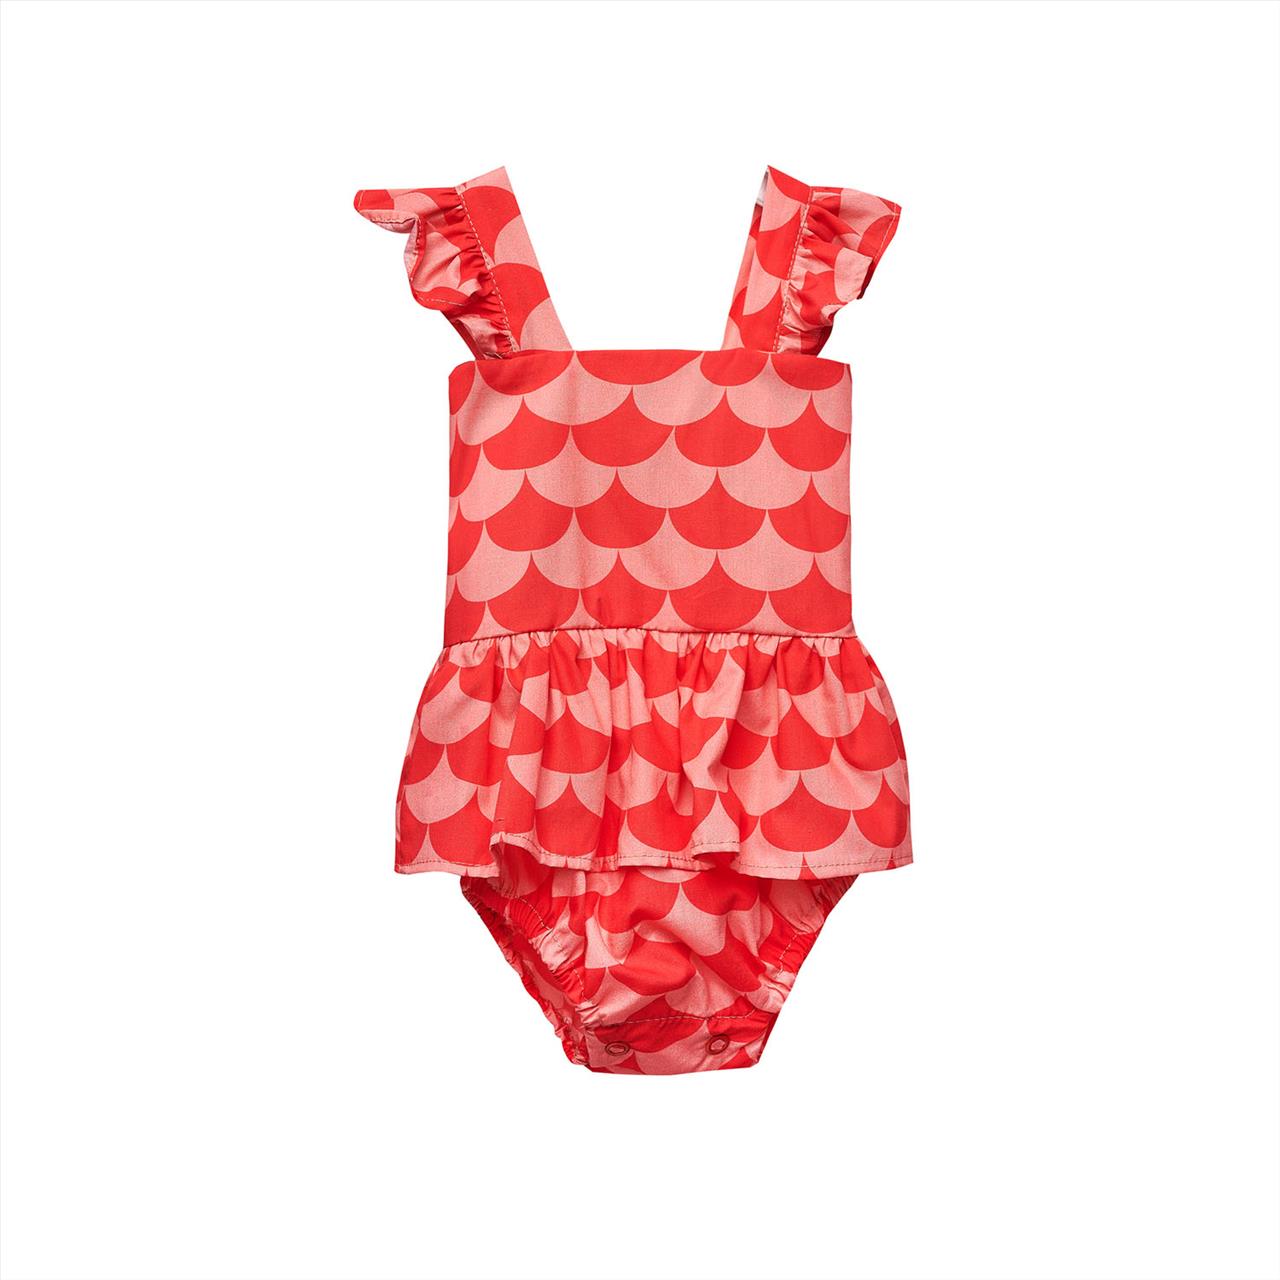 PLAYSUIT RUFFLES BABY BY TWO IN A CASTLE